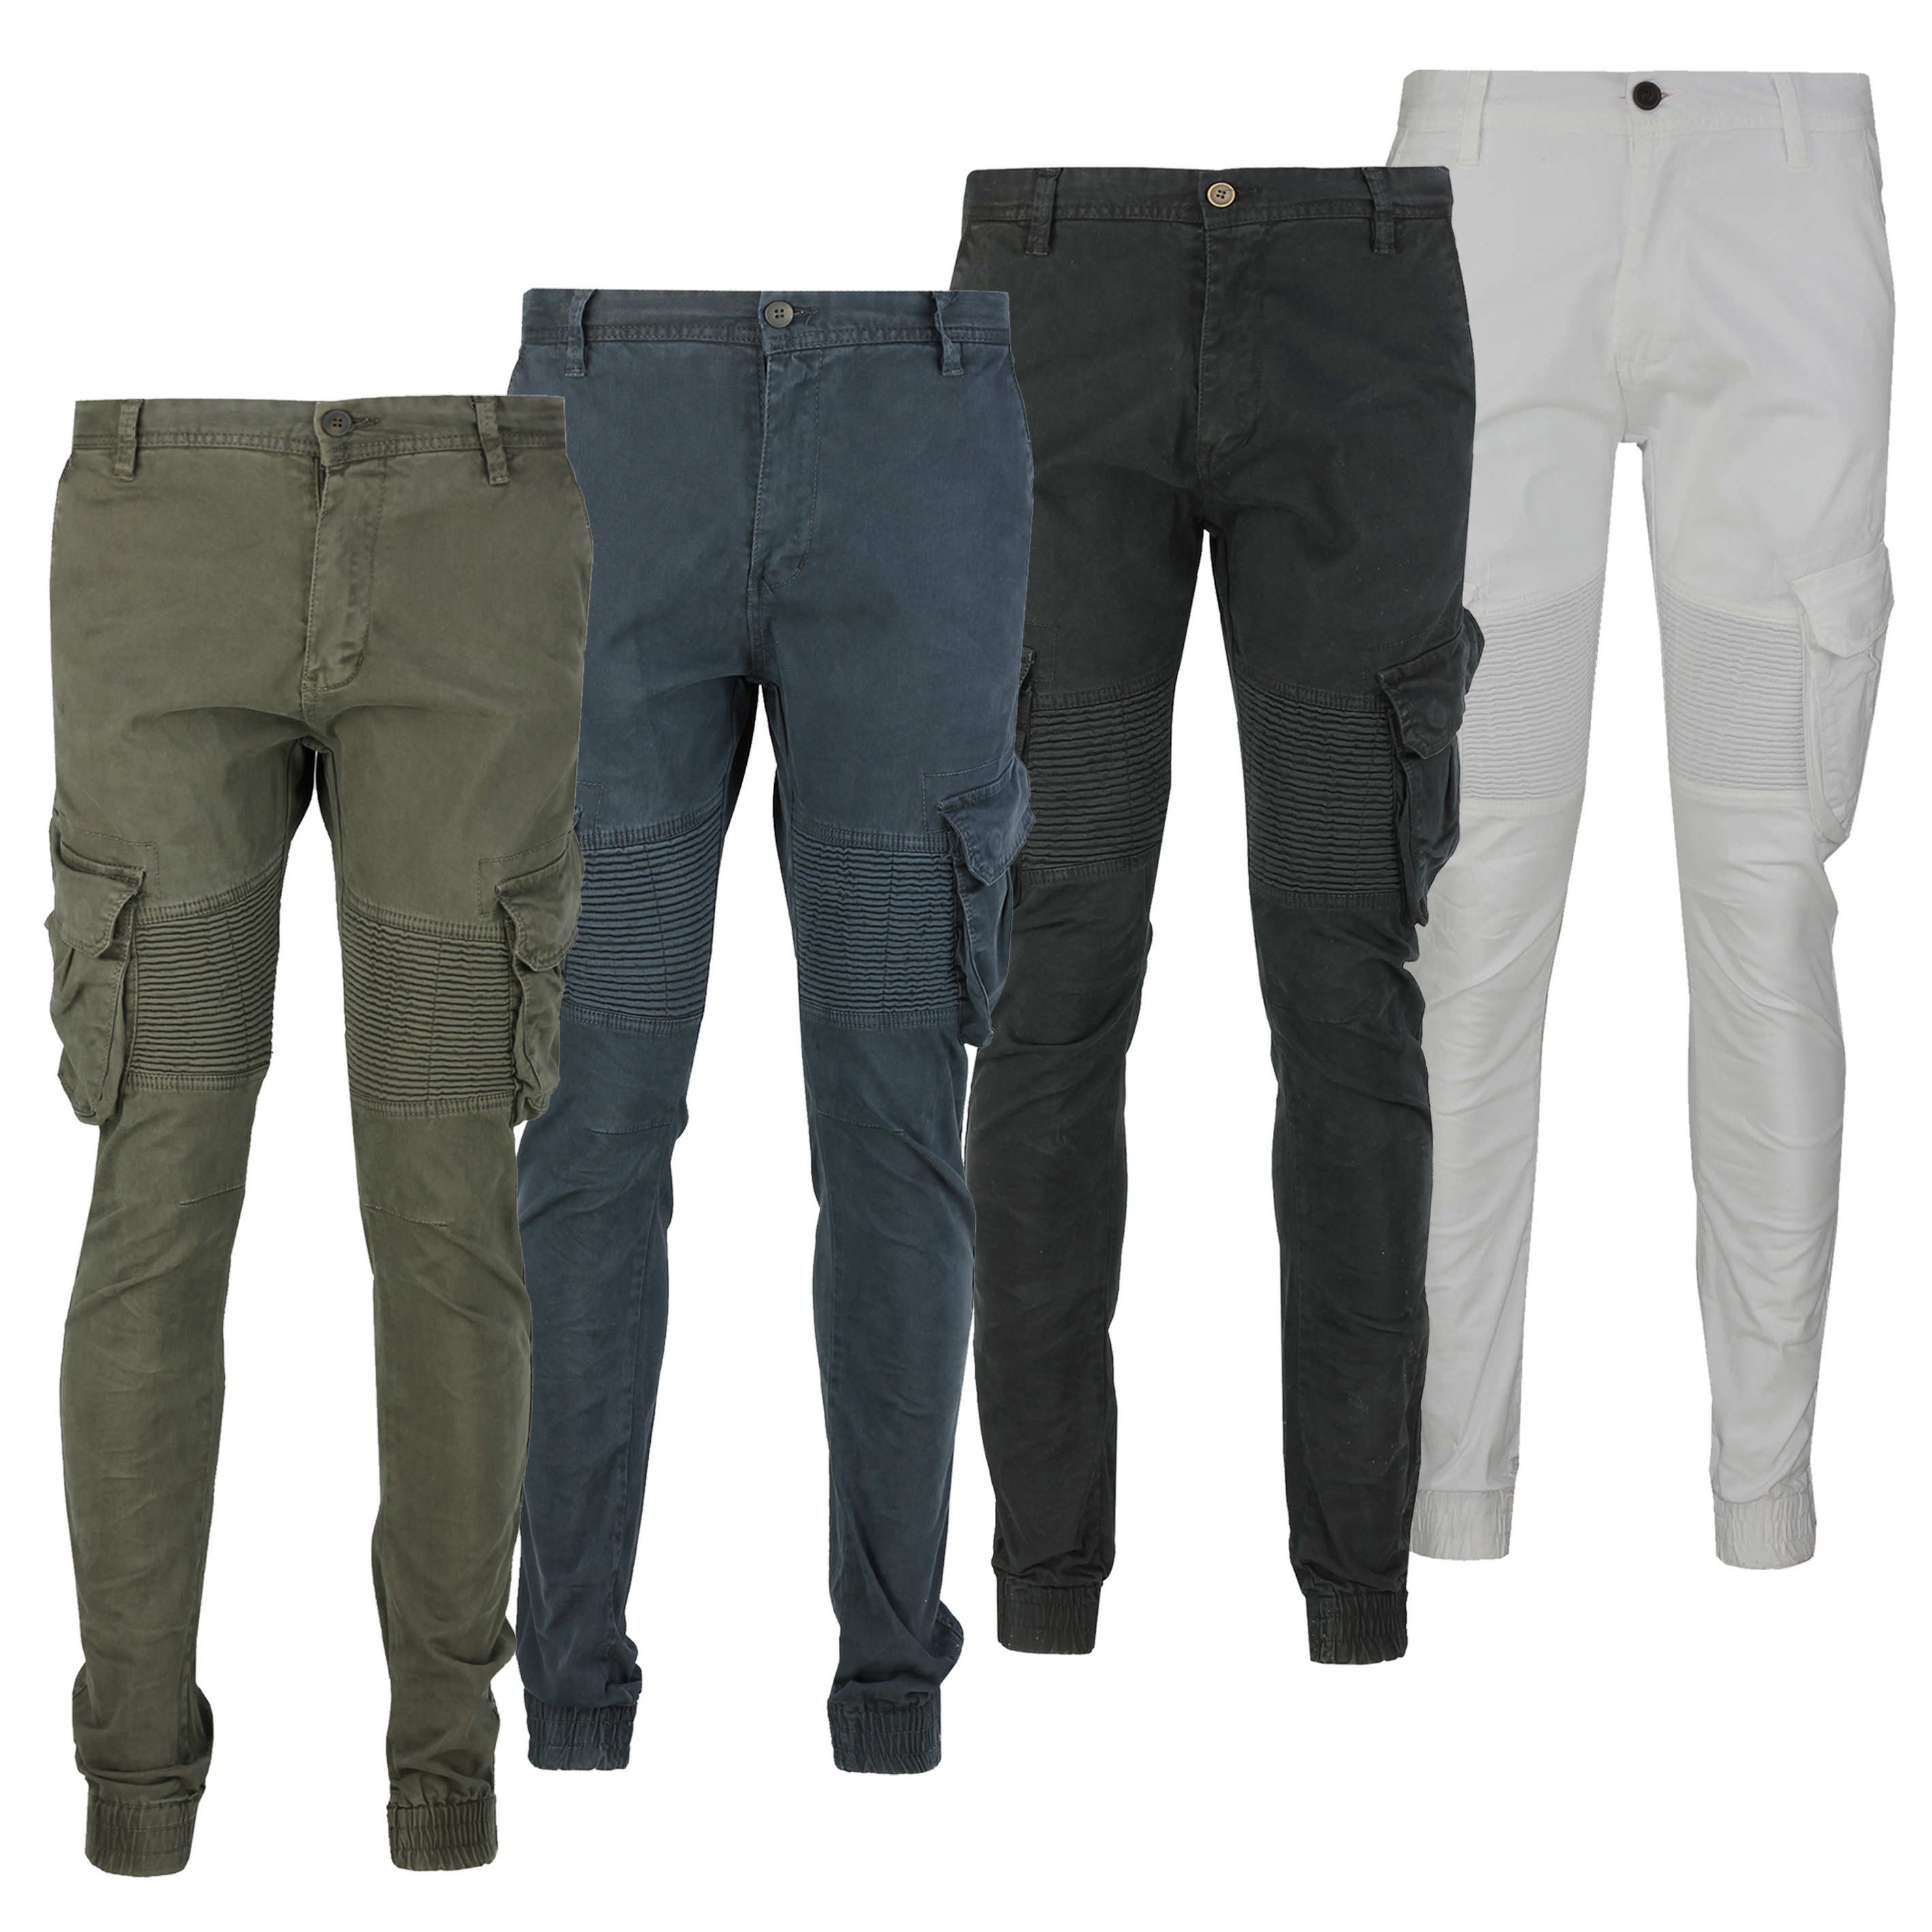 high rise trouser jeans